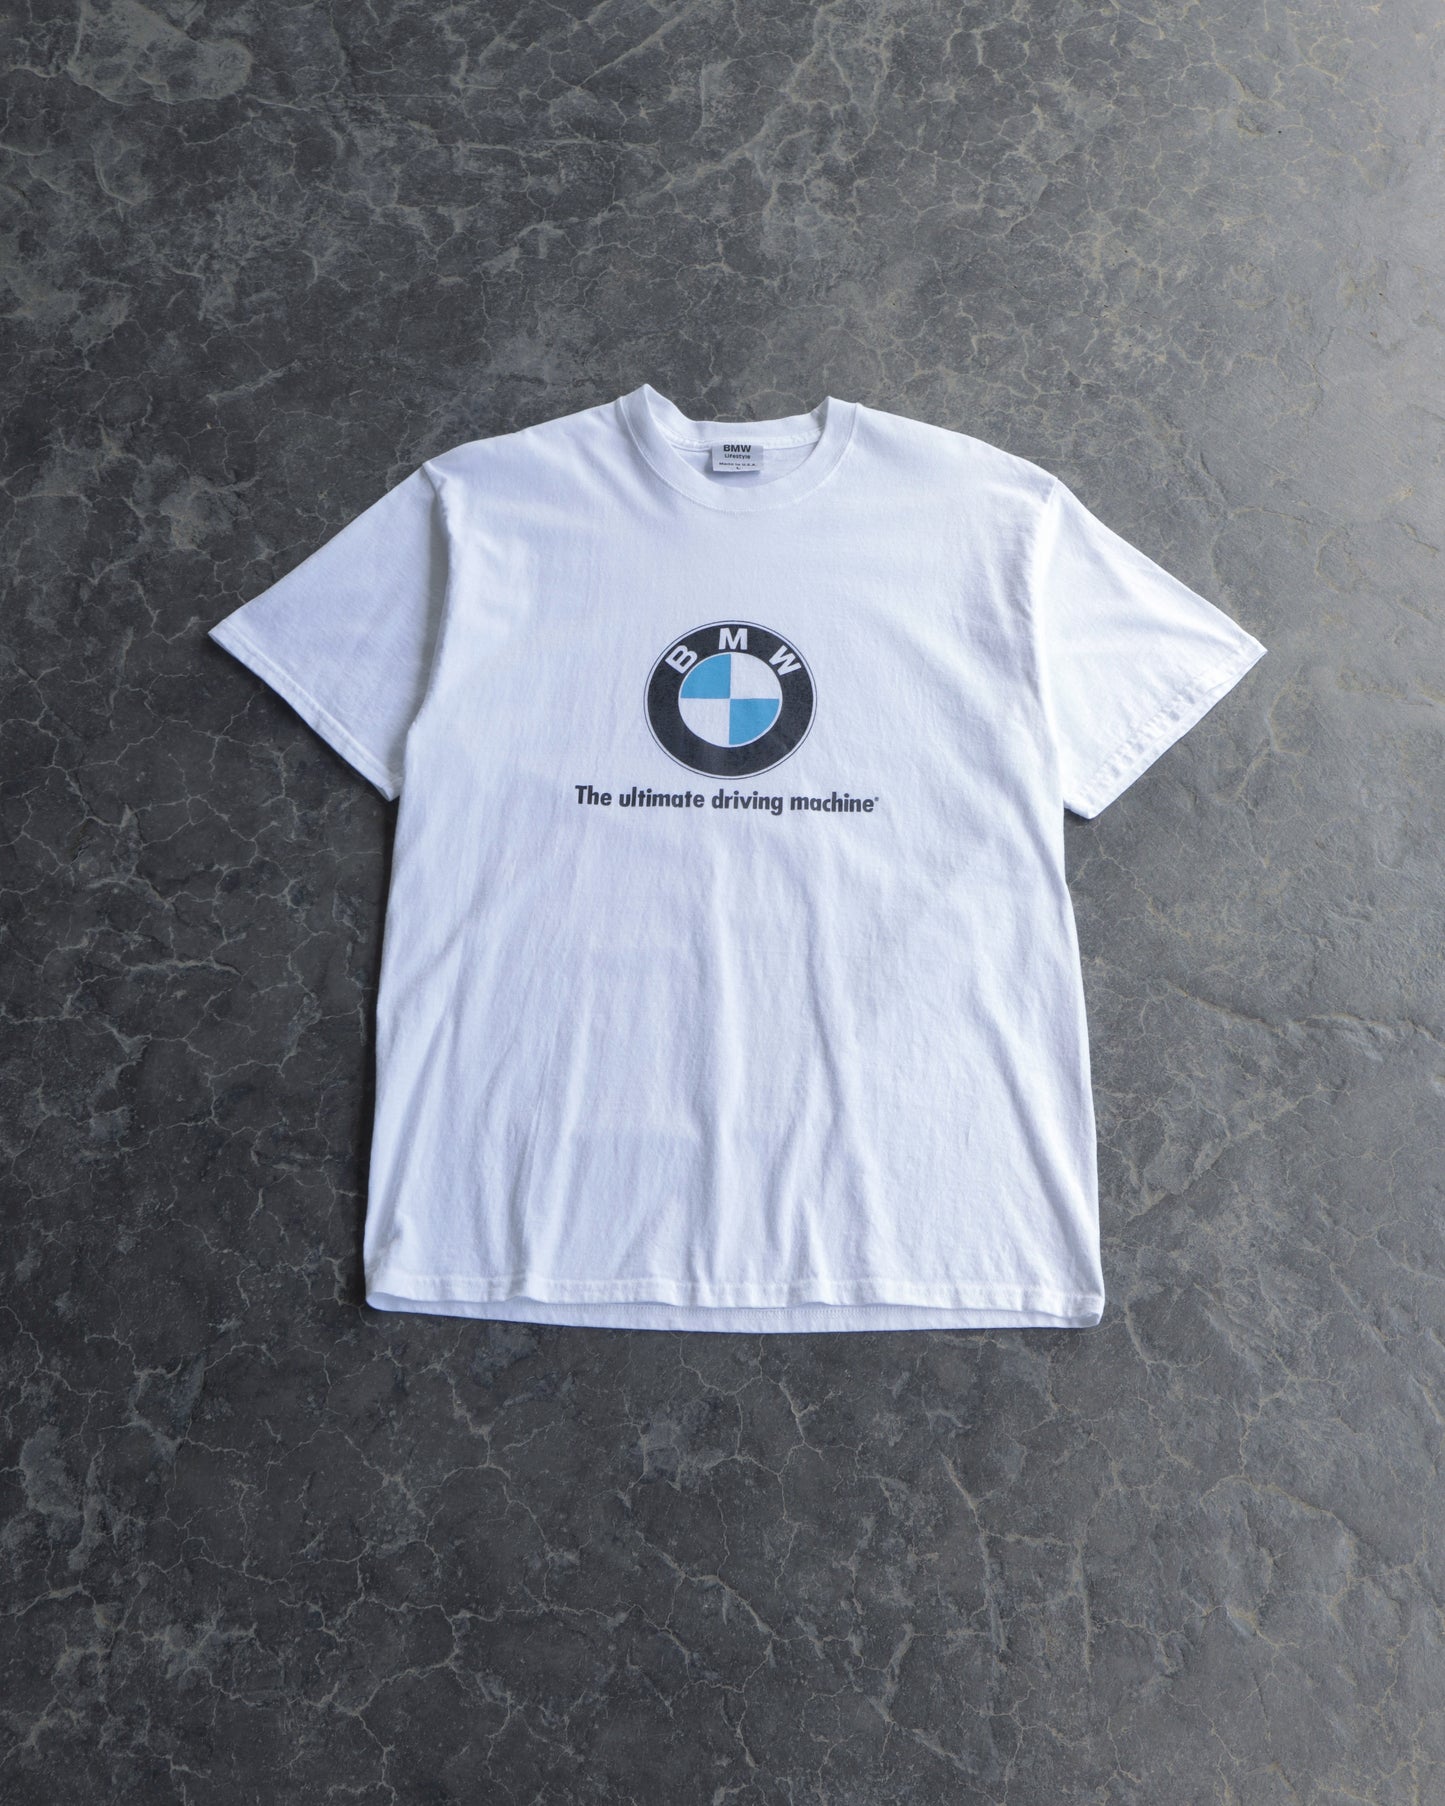 90s BMW The Ultimate Driving Machine Tee - L